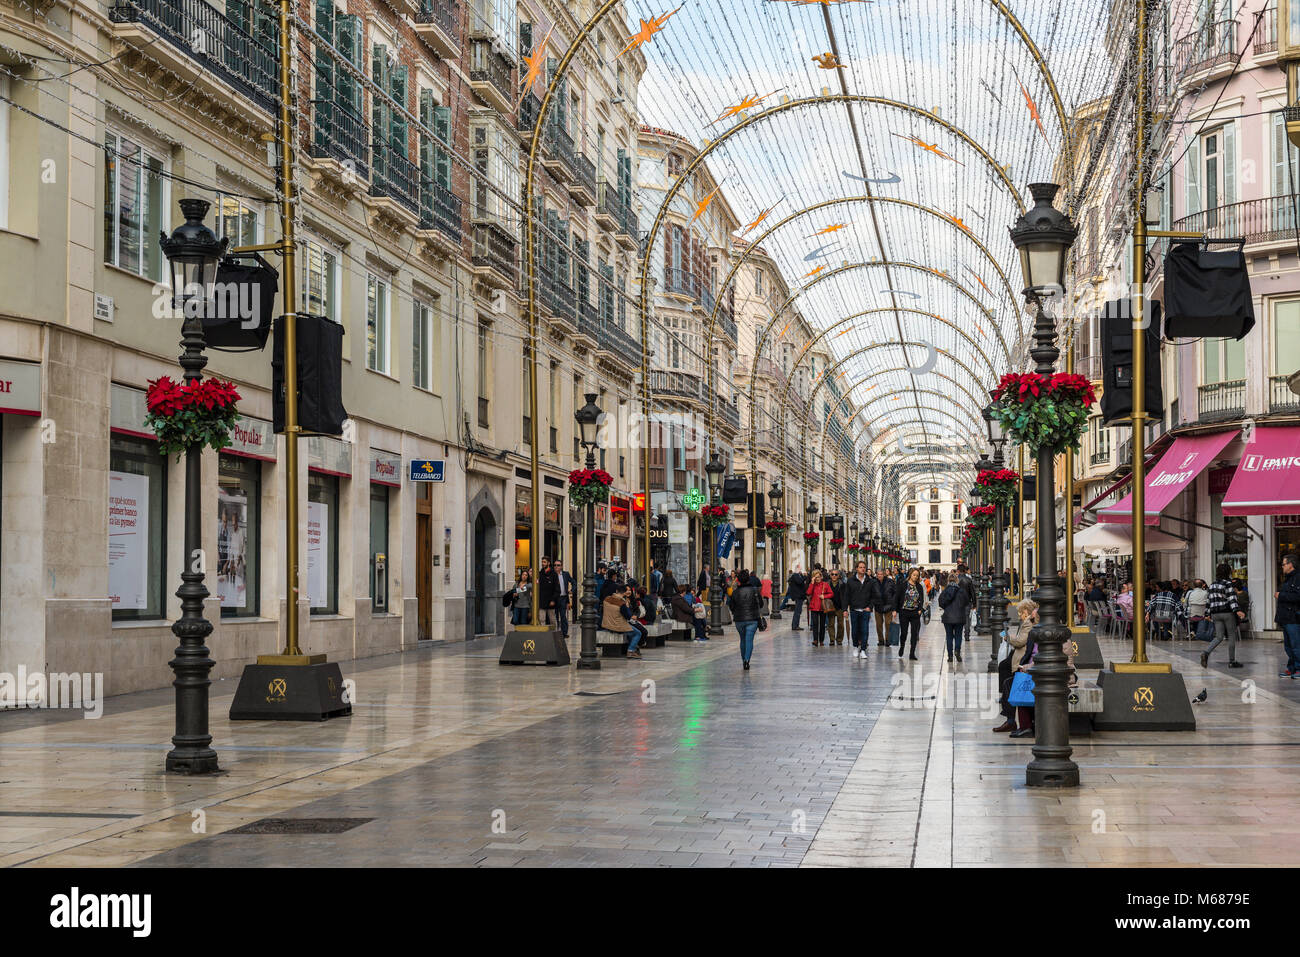 Malaga, Spain - December 7, 2016: People walk along pedestrian Larios Street decorated for Christmas in downtown of Malaga, Andalusia, Spain. Stock Photo